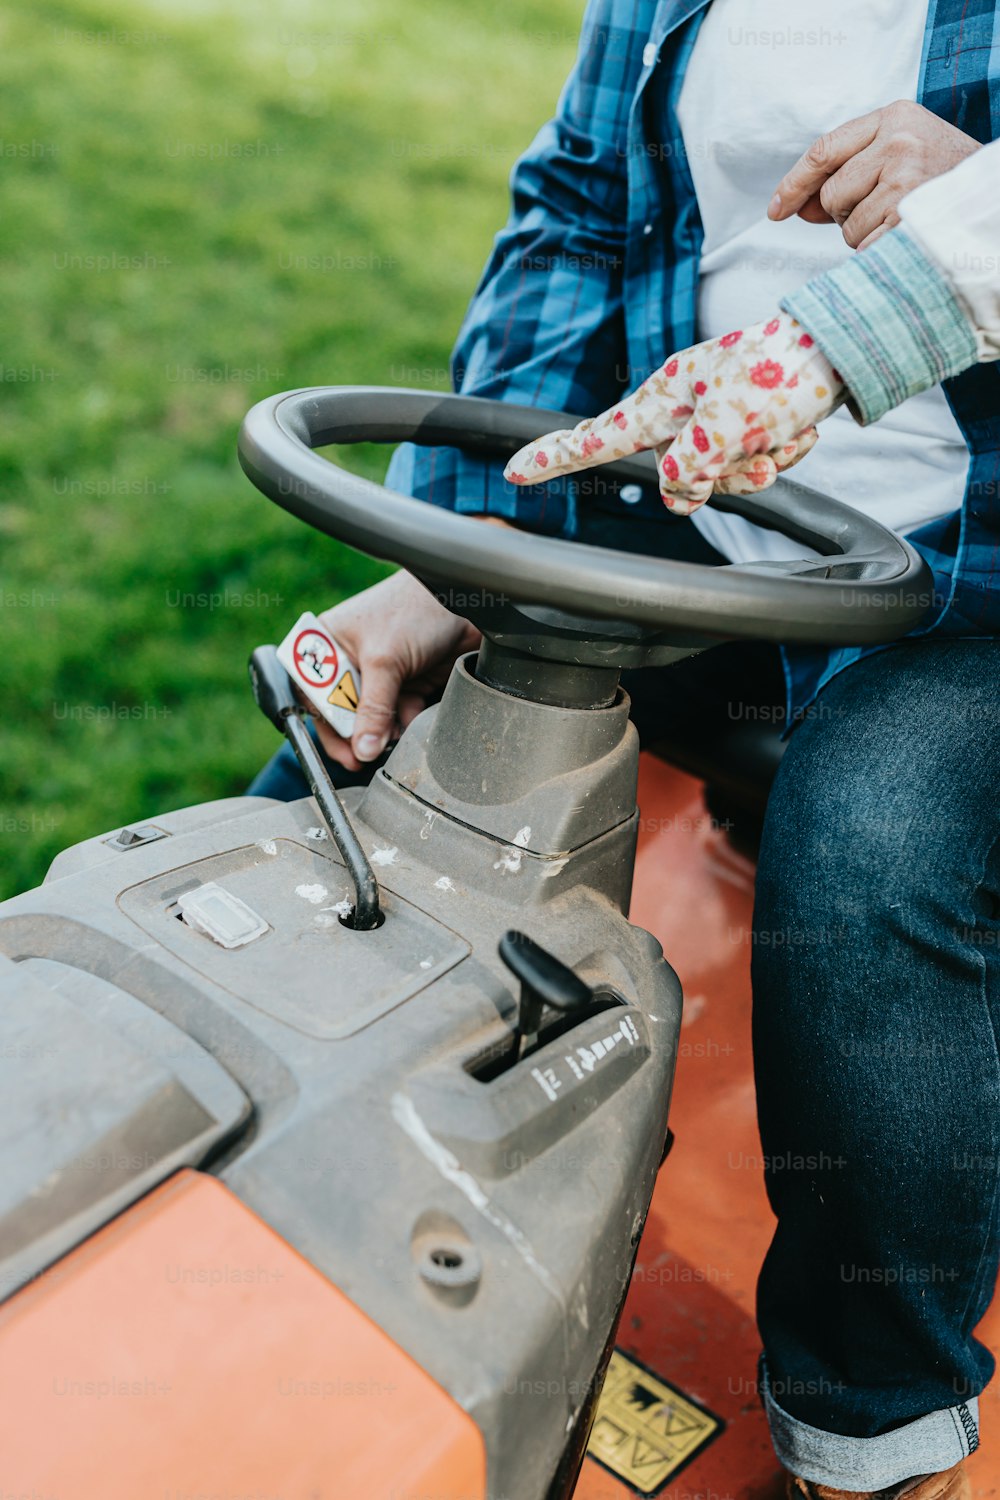 a person sitting on a tractor with a glove on their hand